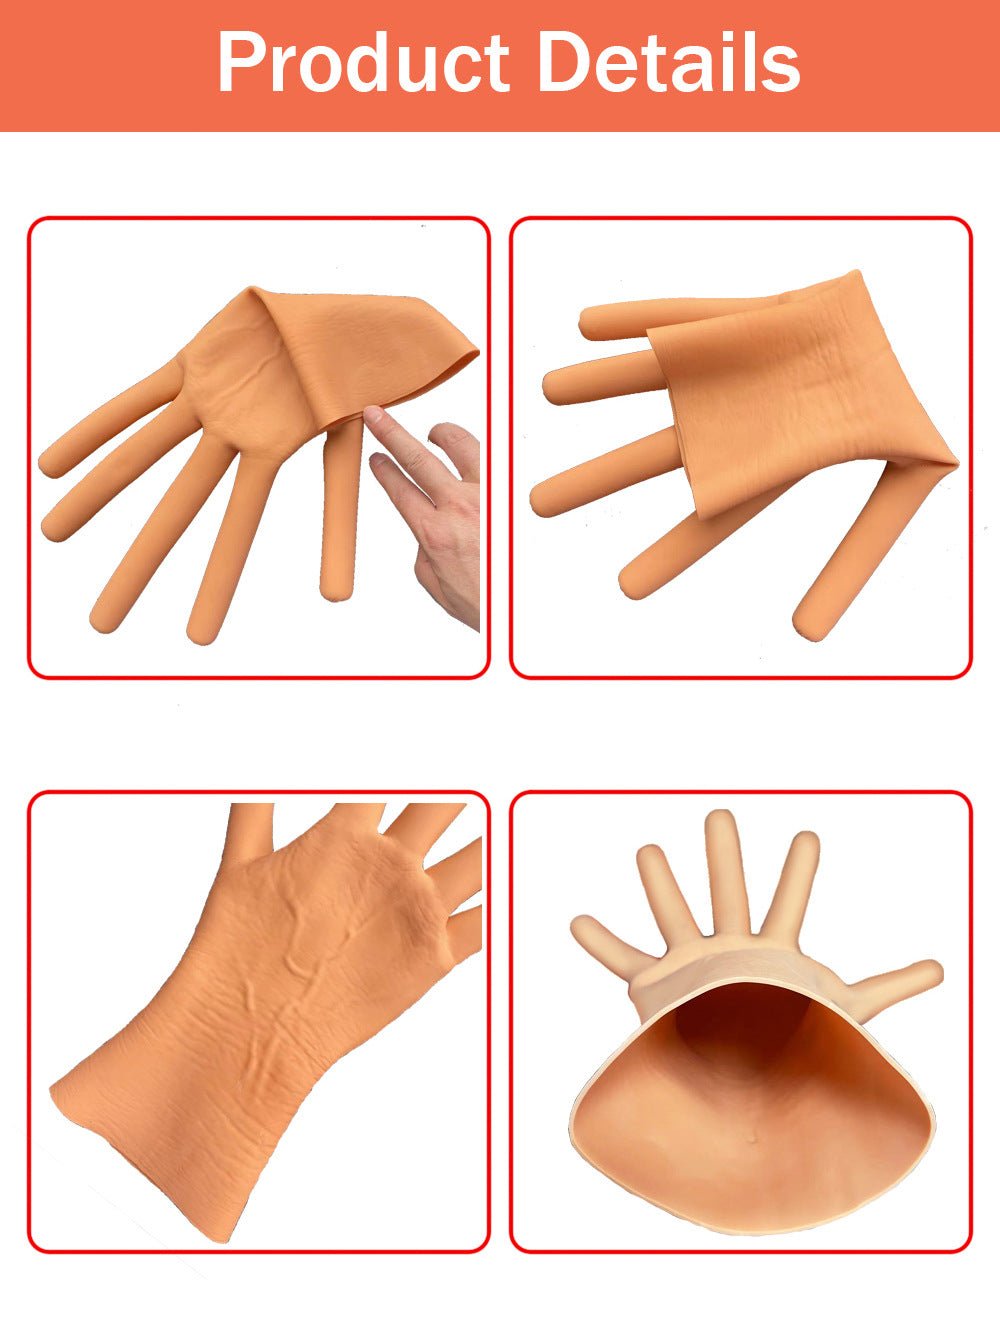 Halloween Party Hot Dog Gloves Dress Up | Party Hot Dog Gloves Dress Up | 
 Product information:
 
 Color: Hot dog gloves
 
 Size: average size
 
 Image: Cartoon
 
 Material: